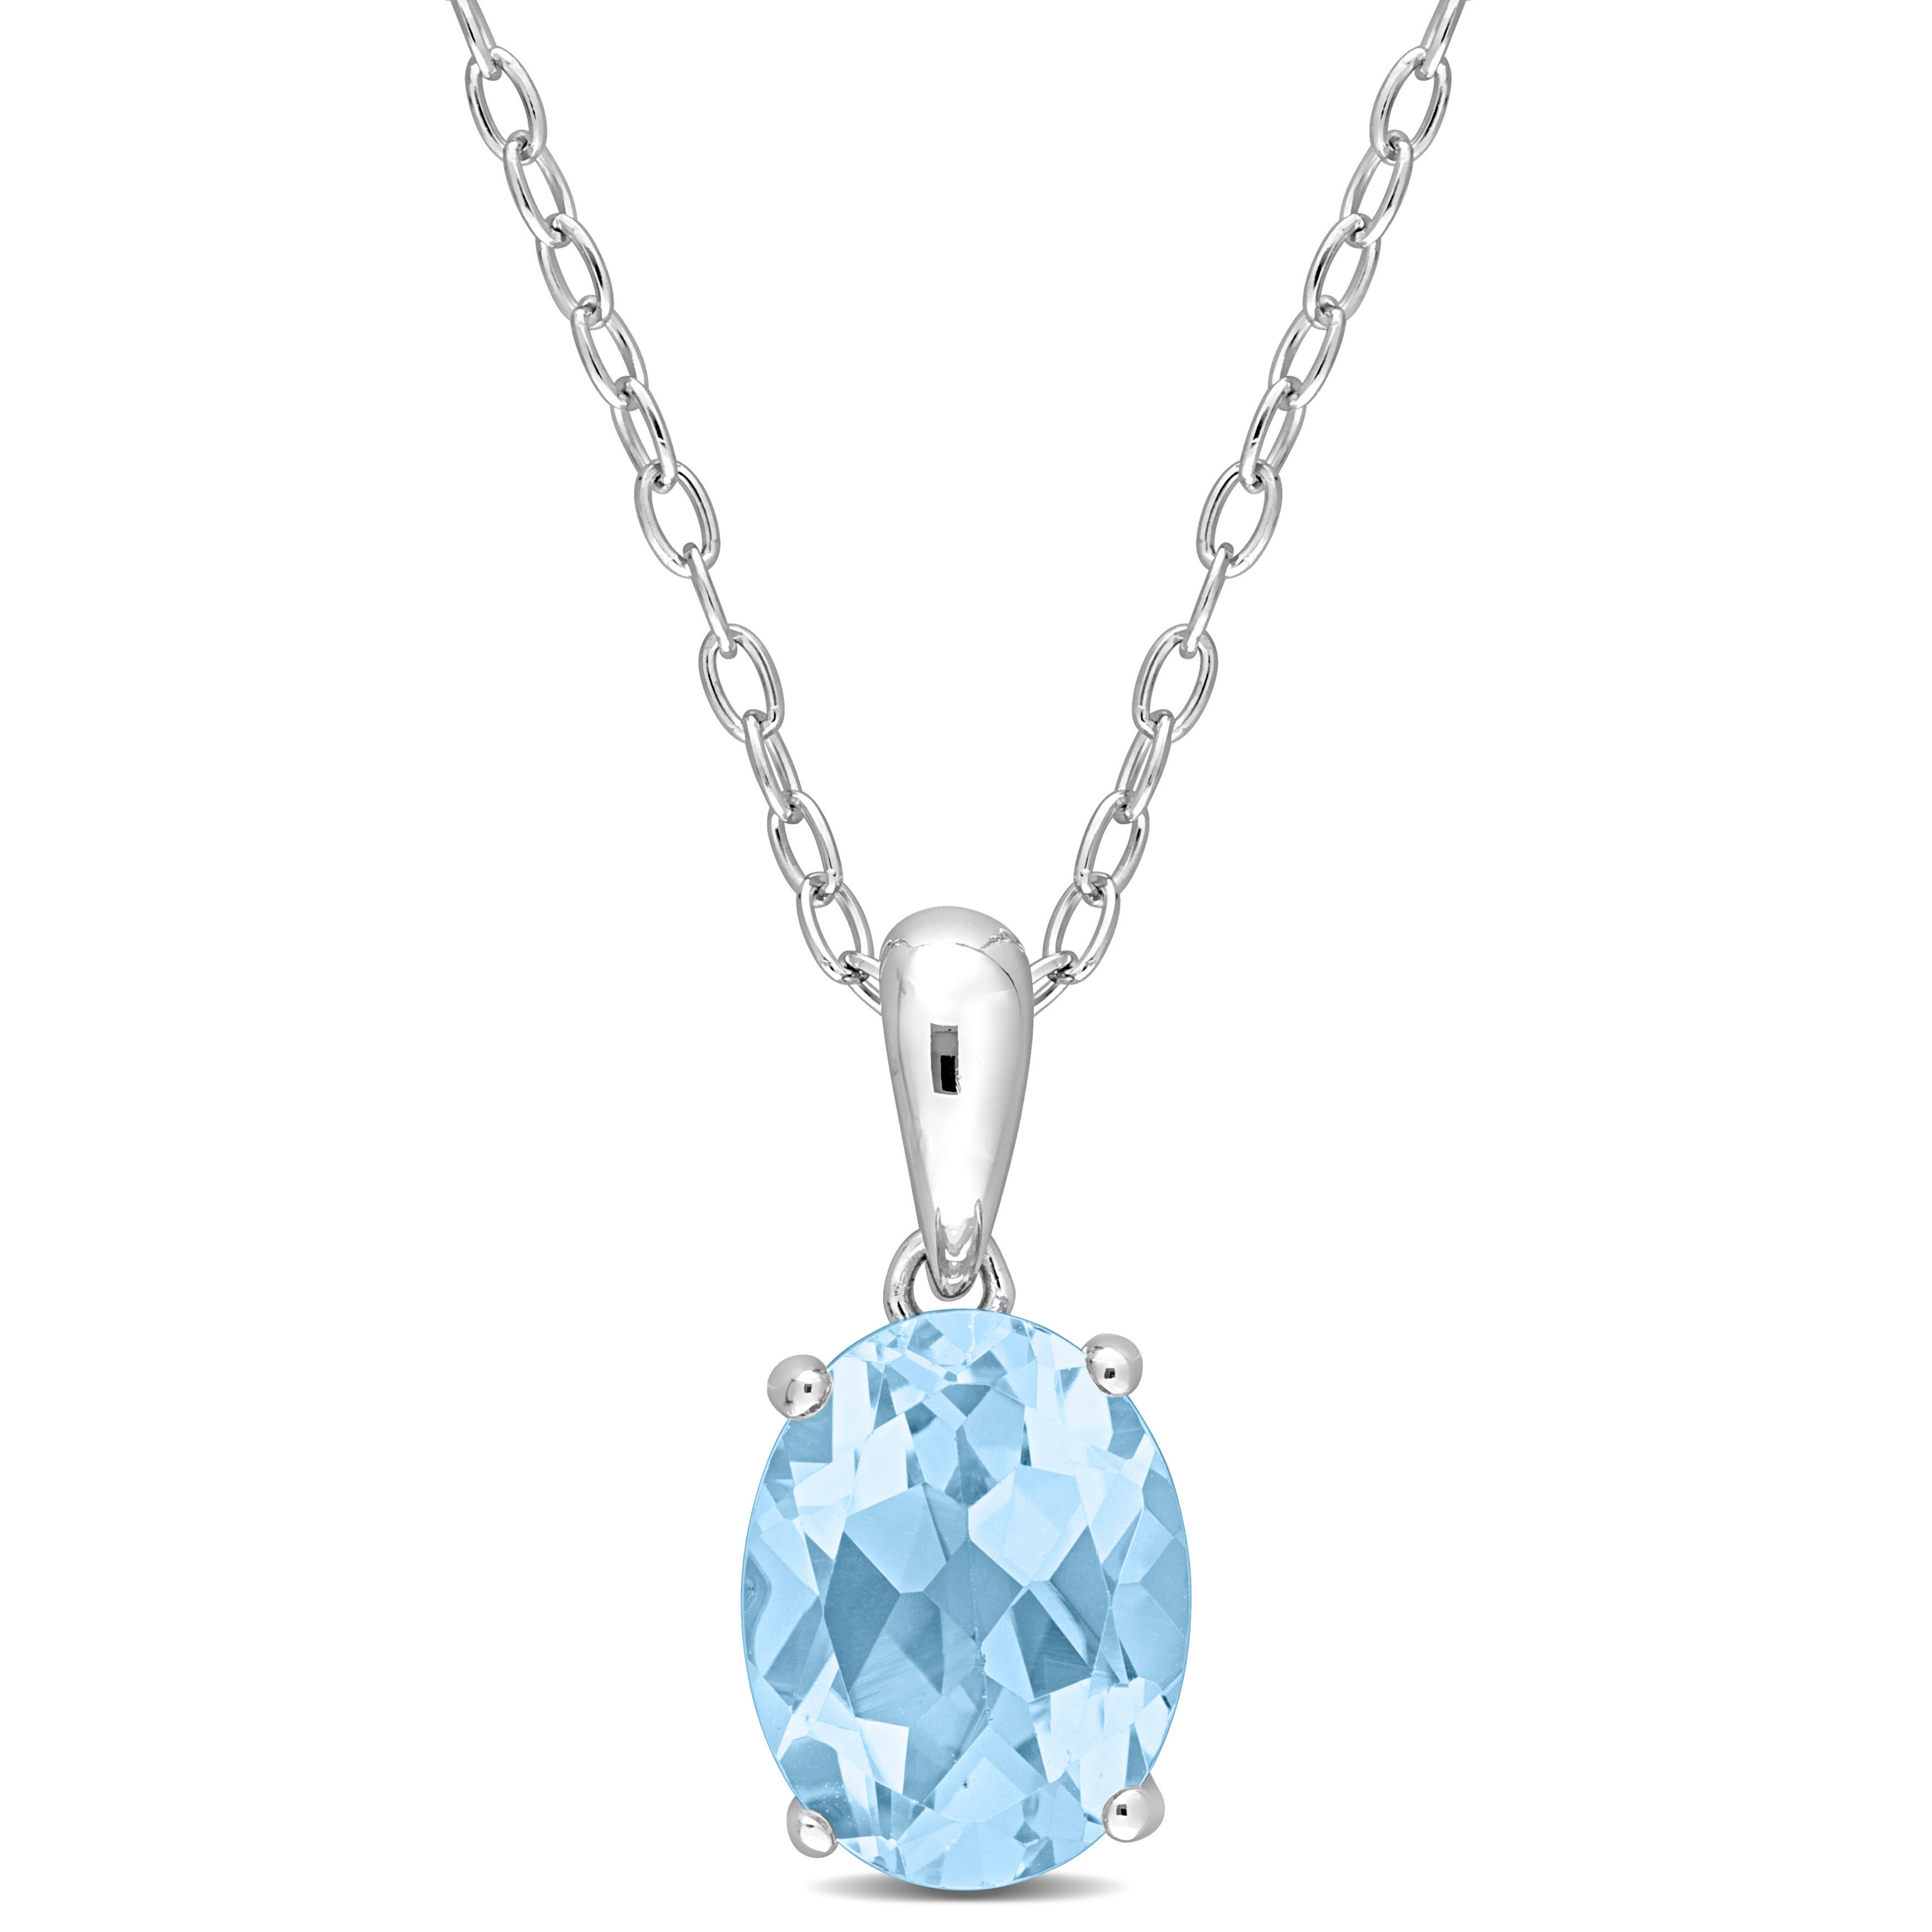 2 1/2 CT TGW Oval Sky Blue Topaz Solitaire Heart Design Pendant with Chain in Sterling Silver - 18 in.